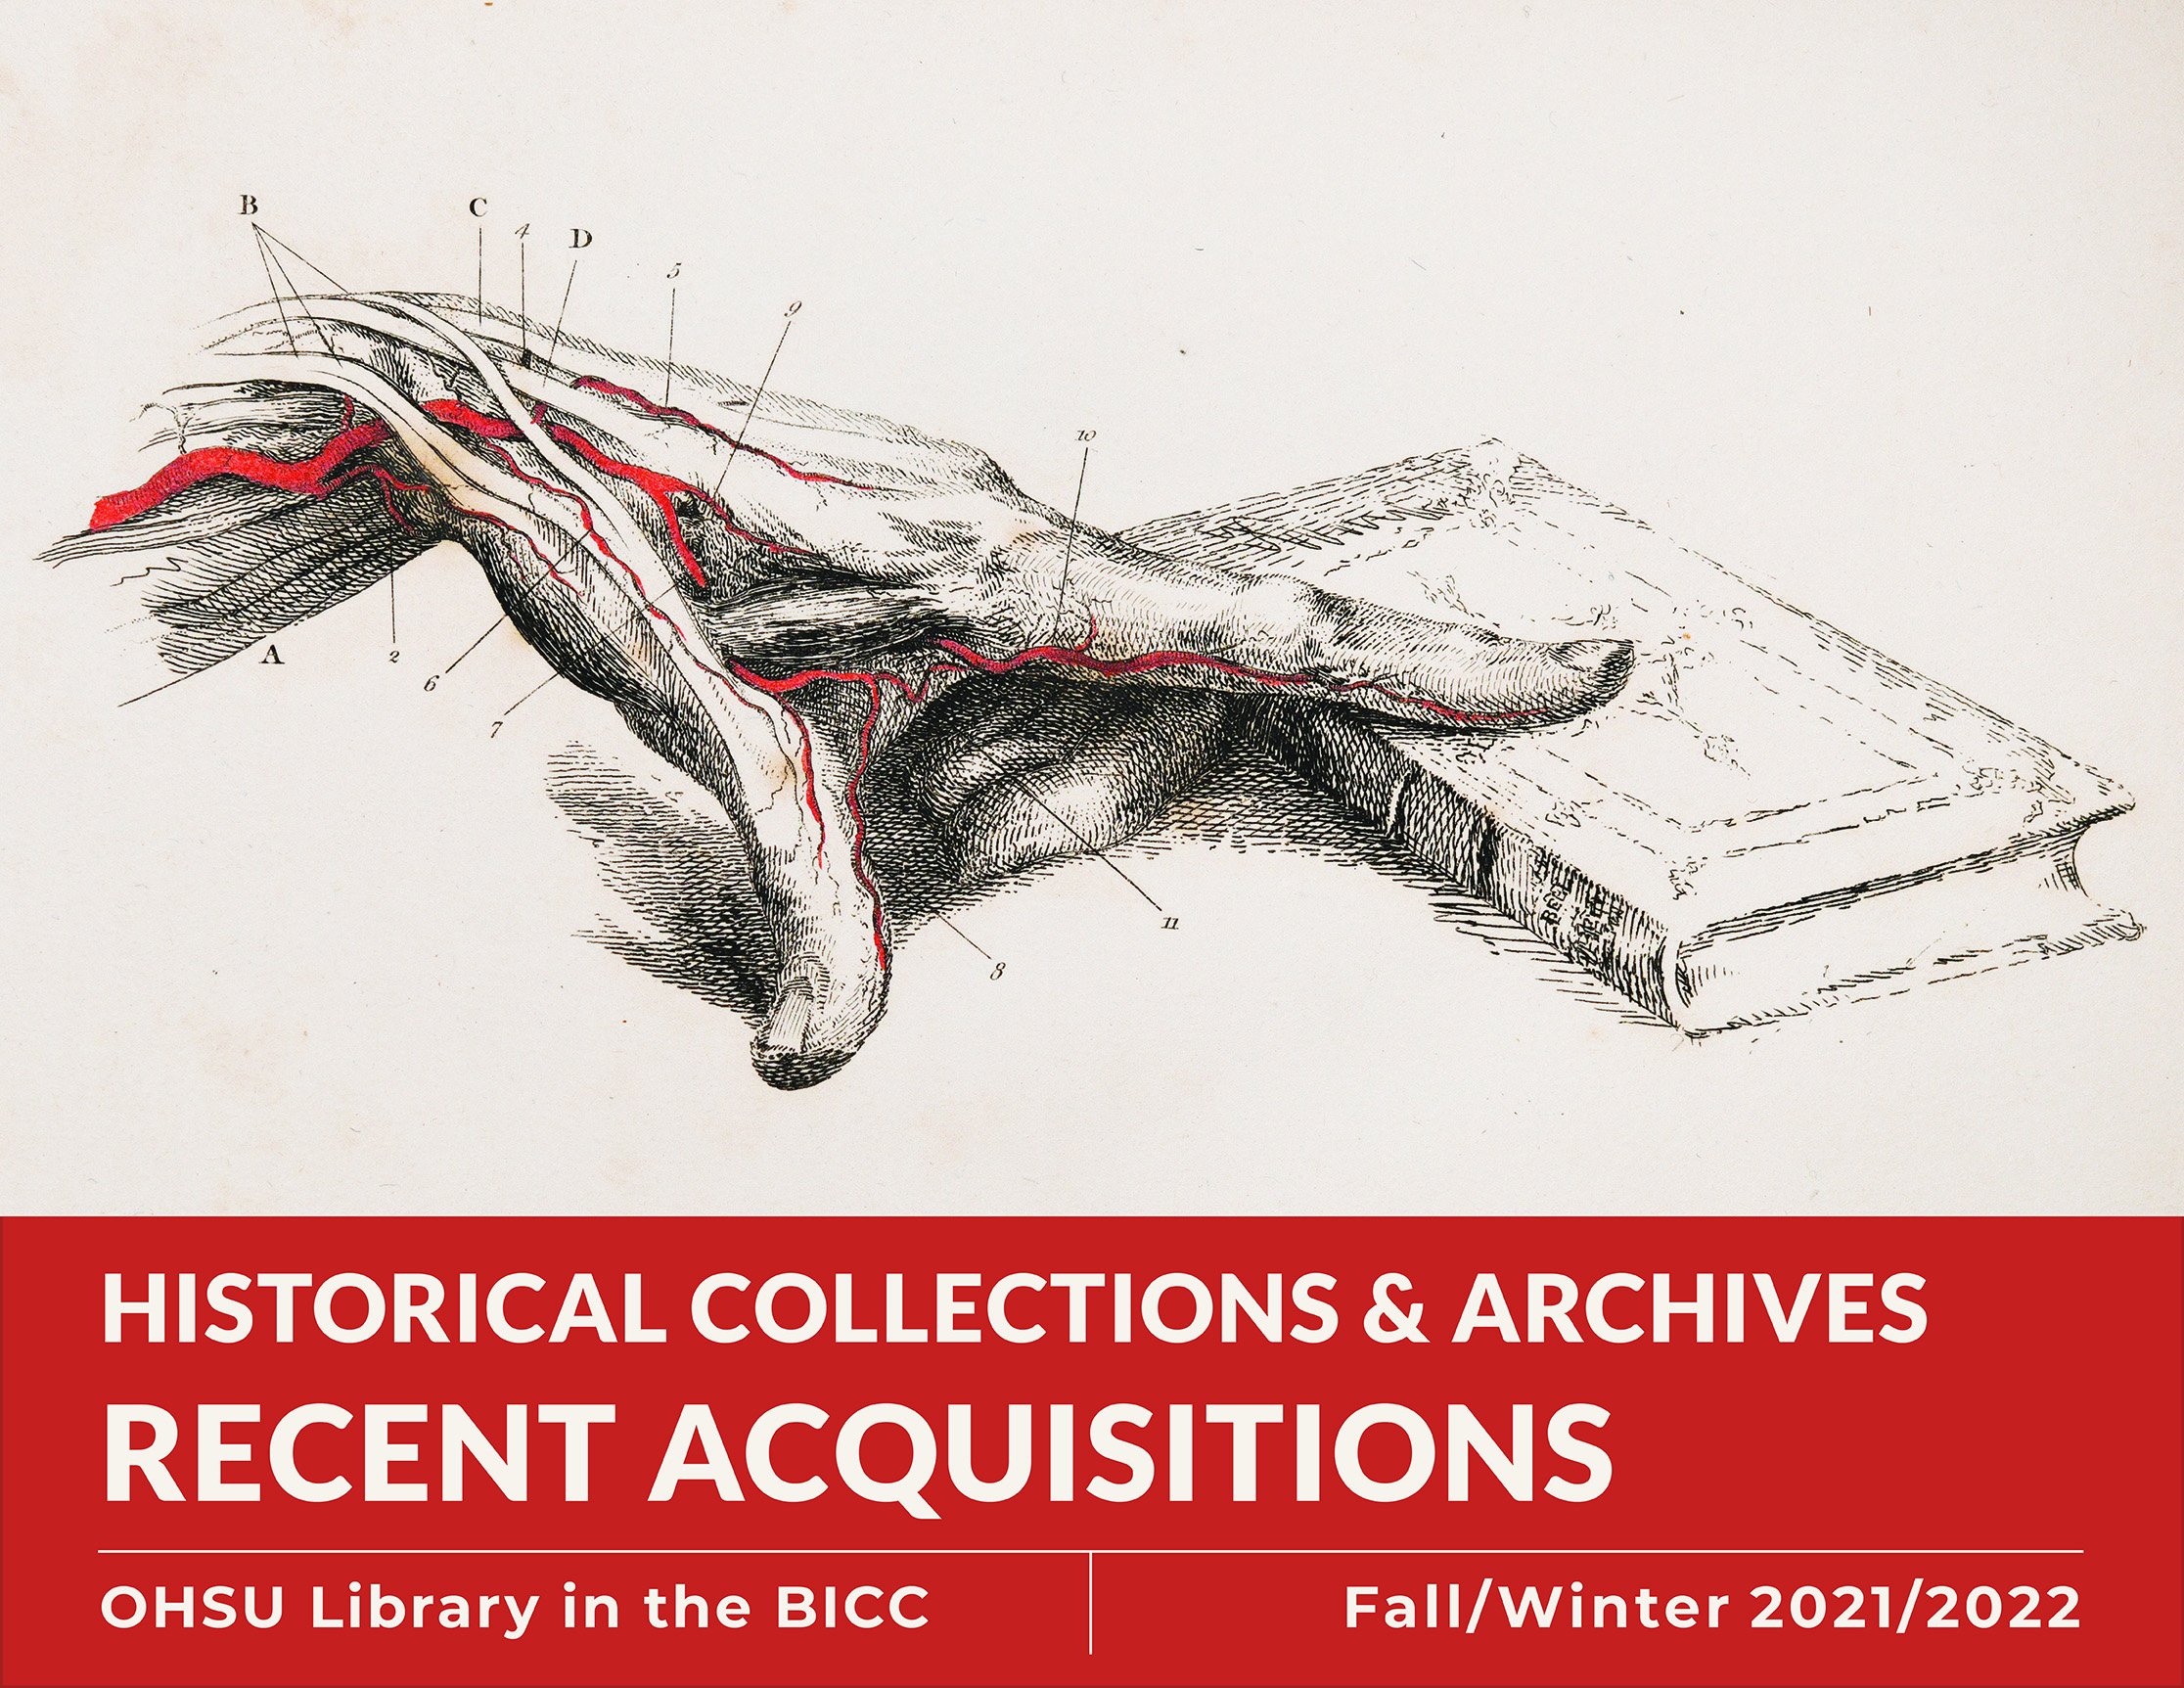 Historical Collections & Archives: Recent Acquisitions. OHSU Library in the BICC. Fall/Winter 2022. Illustration of a hand composed of muscles and blood vessels resting on a closed book.